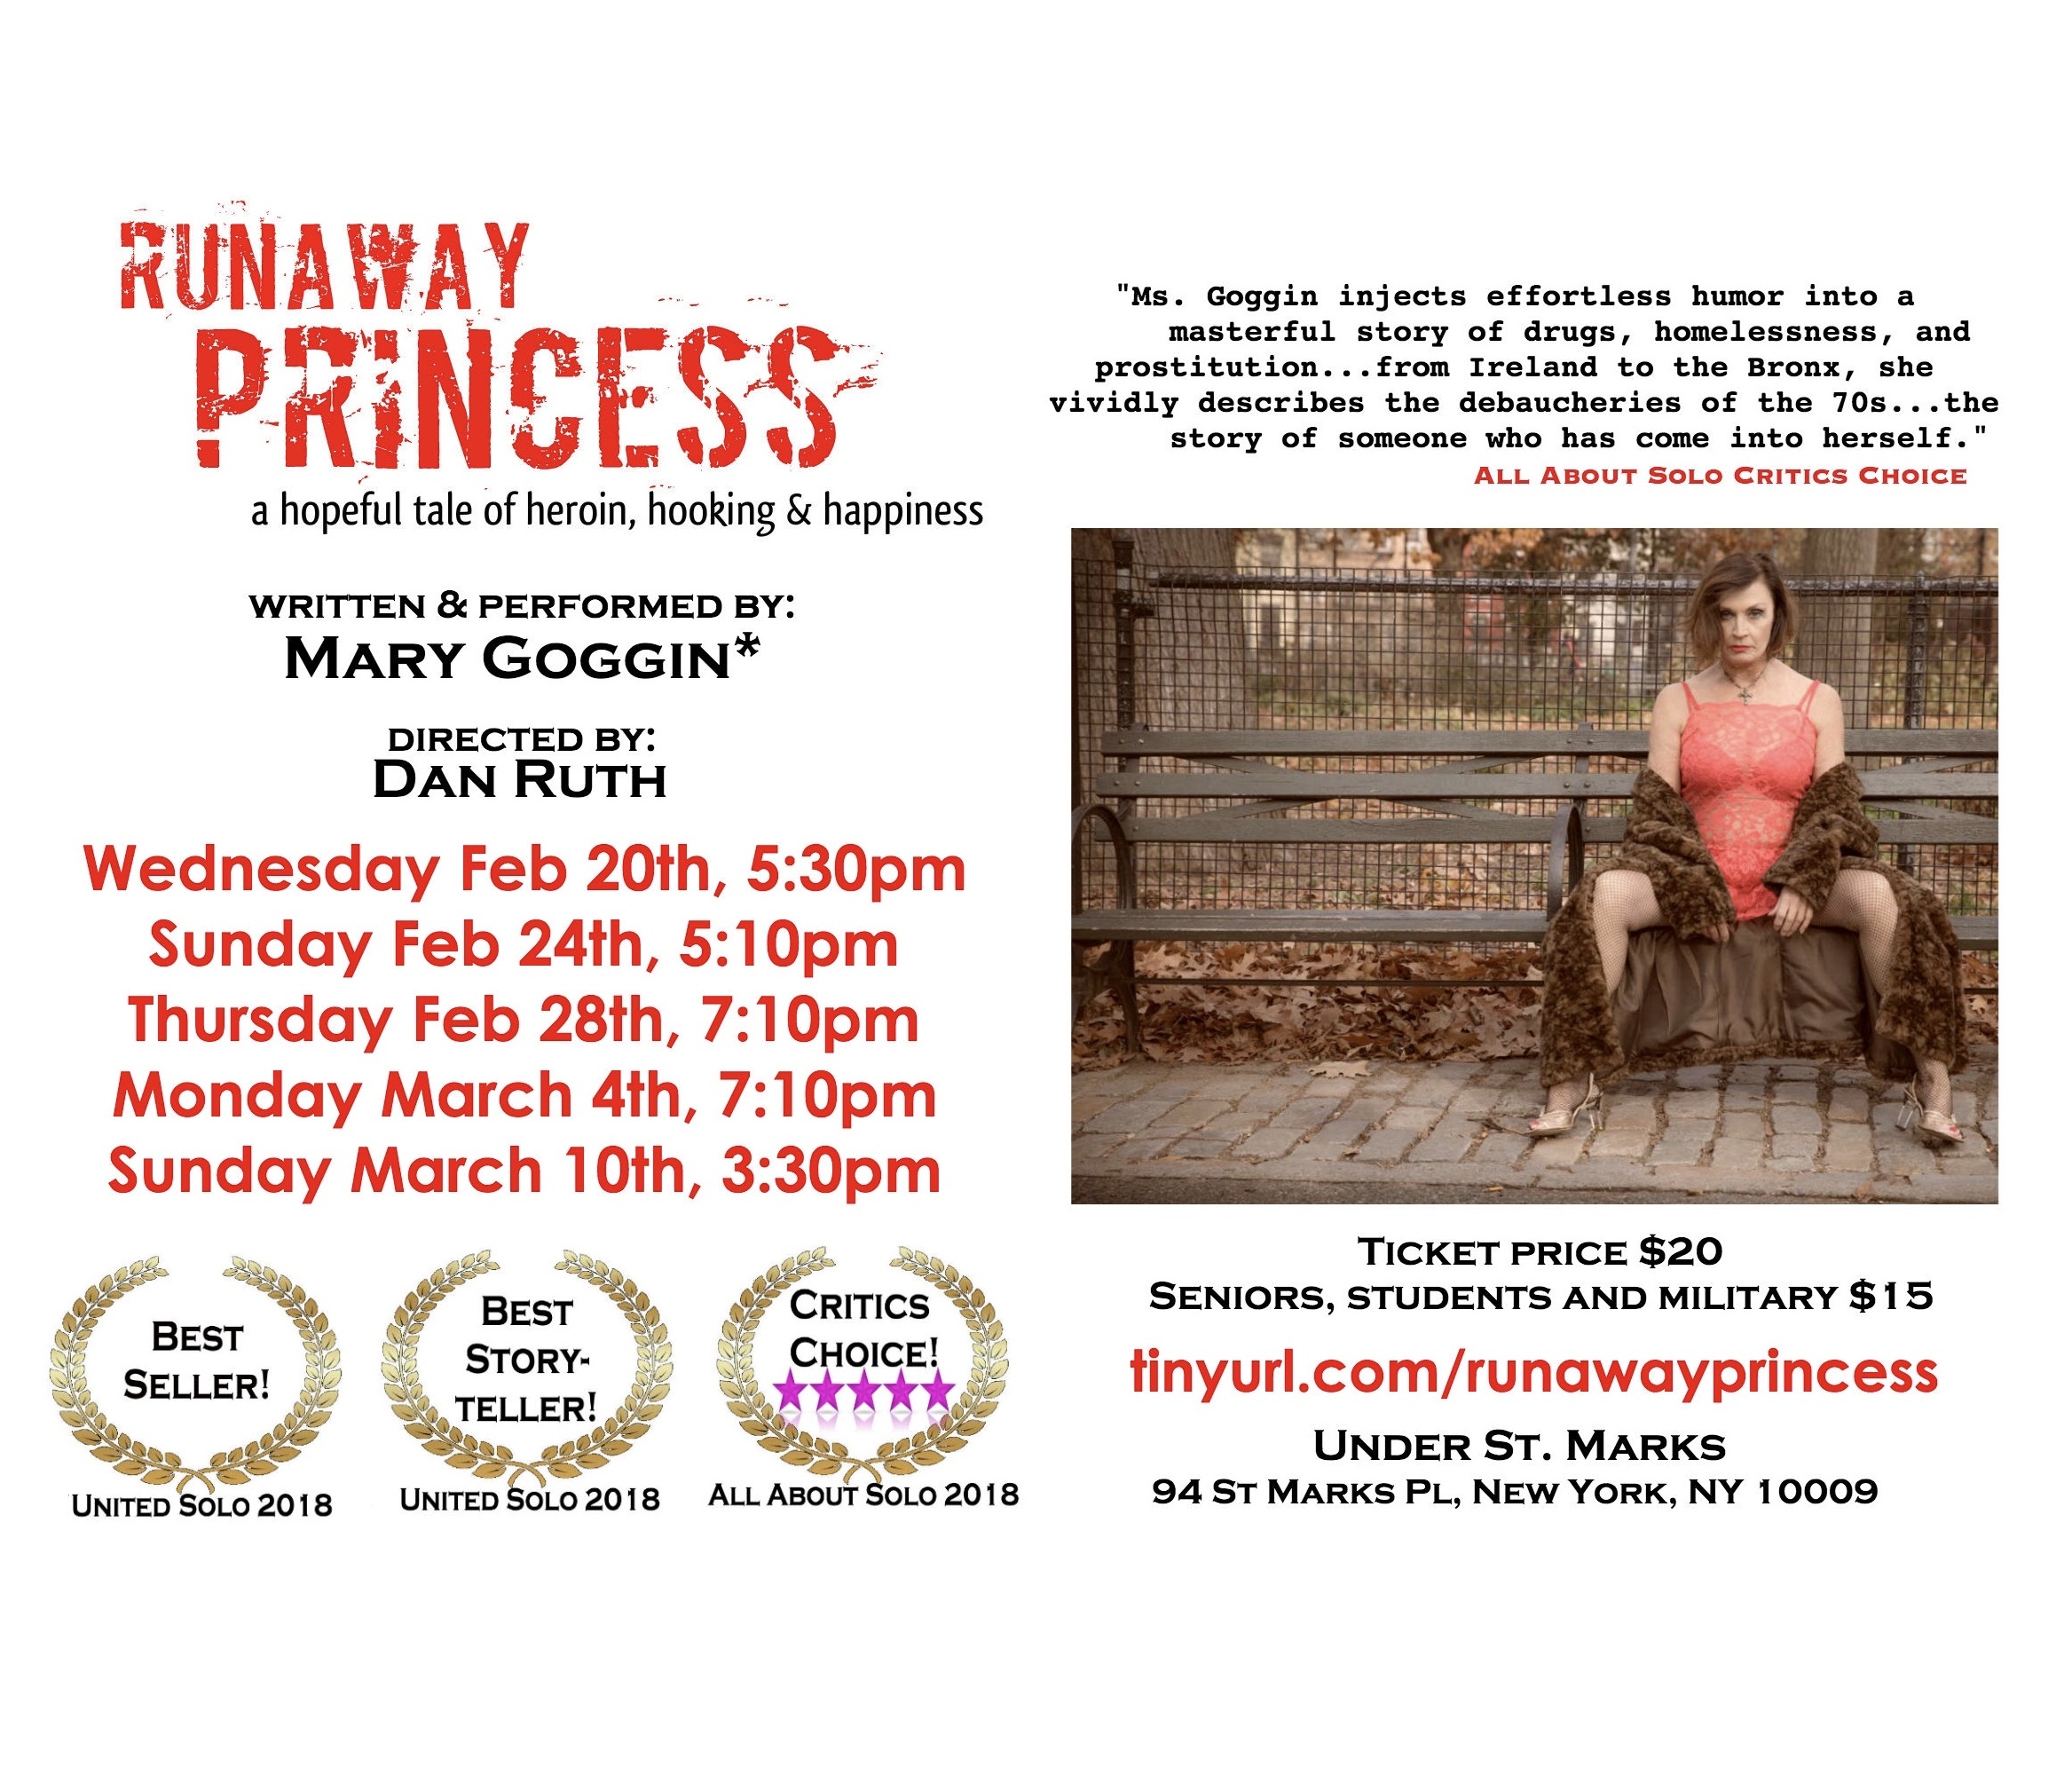 Cancelled: Presenting Mary Goggin’s Multiple Award Winning “Runaway Princess, A Hopeful Tale Of Heroin, Hooking & Happiness”